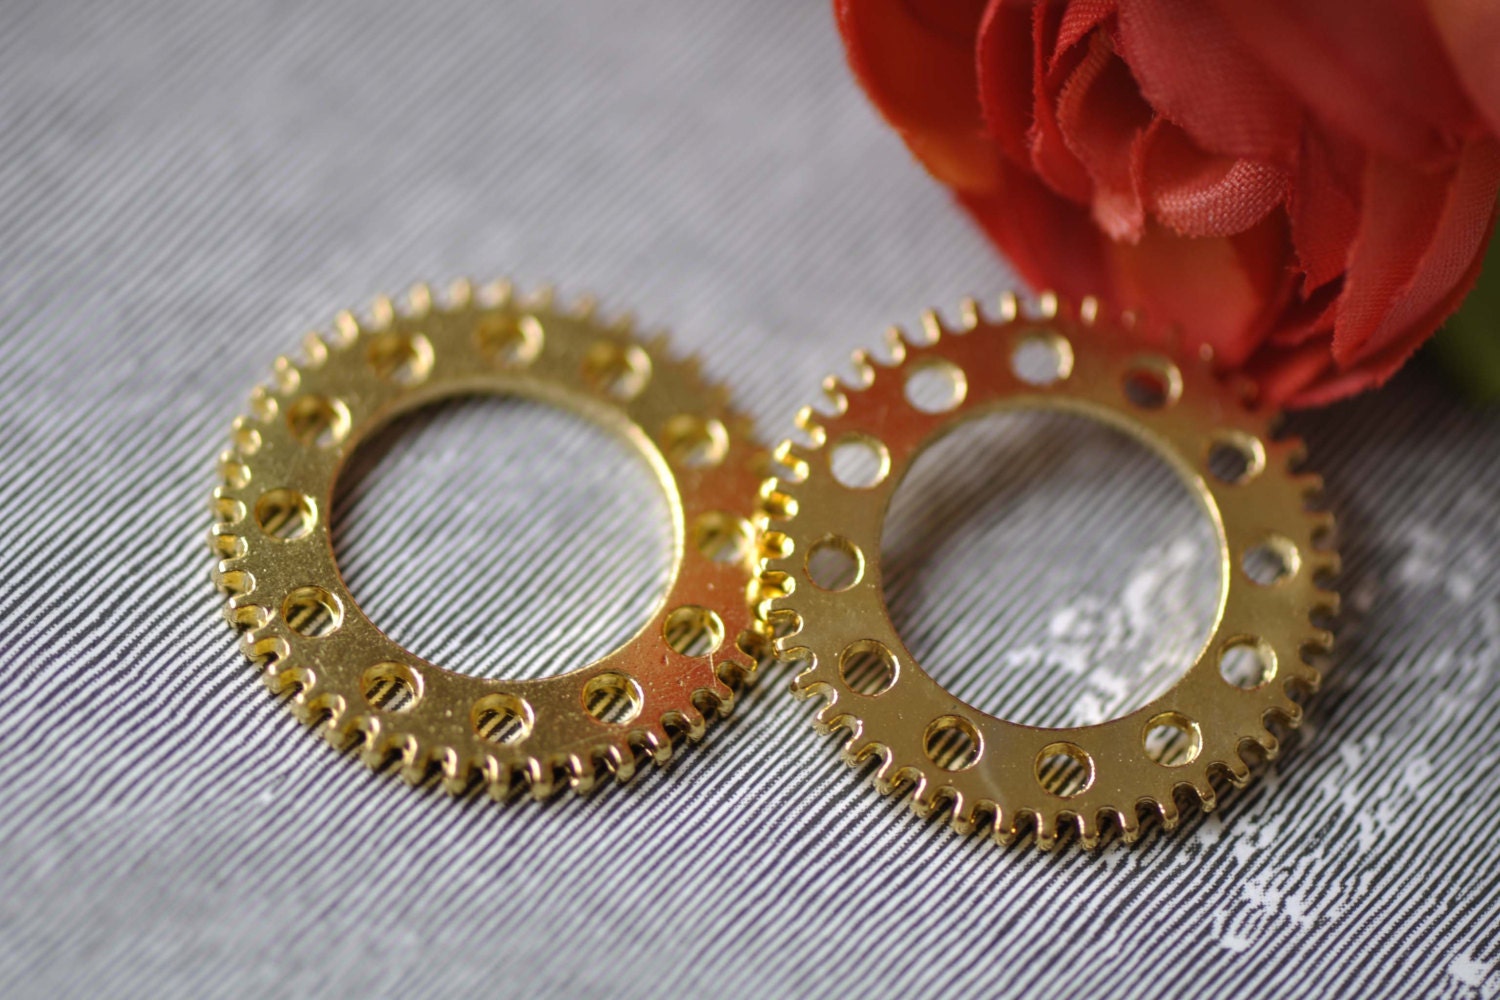 Gold Steampunk Charms | Clockwork Gear Charm Connector | Mechanical Gogwheel Watch Parts | Vintage Steam Punk Jewelry Making (8pcs / Antique Gold /